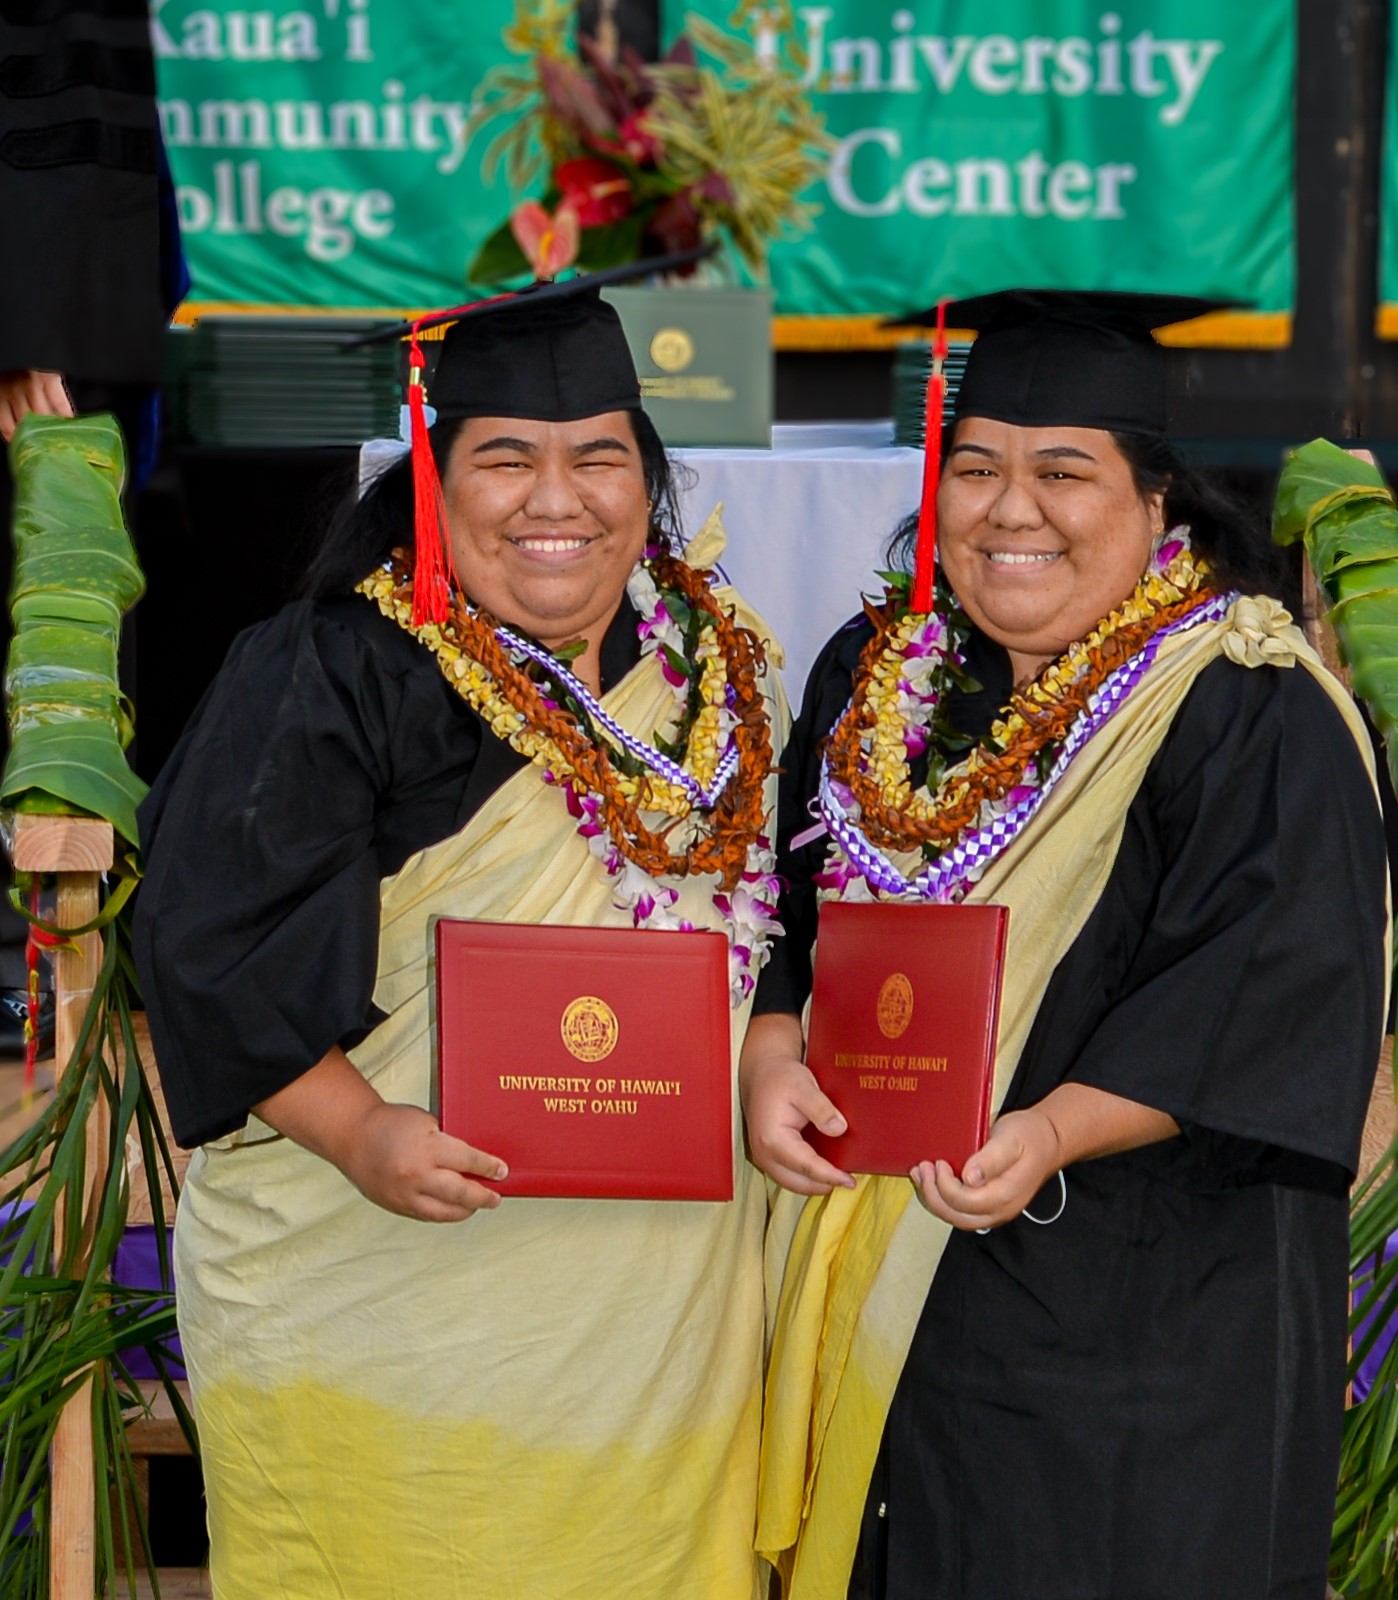 Online Learning with Local Support The University Center at Kauaʻi